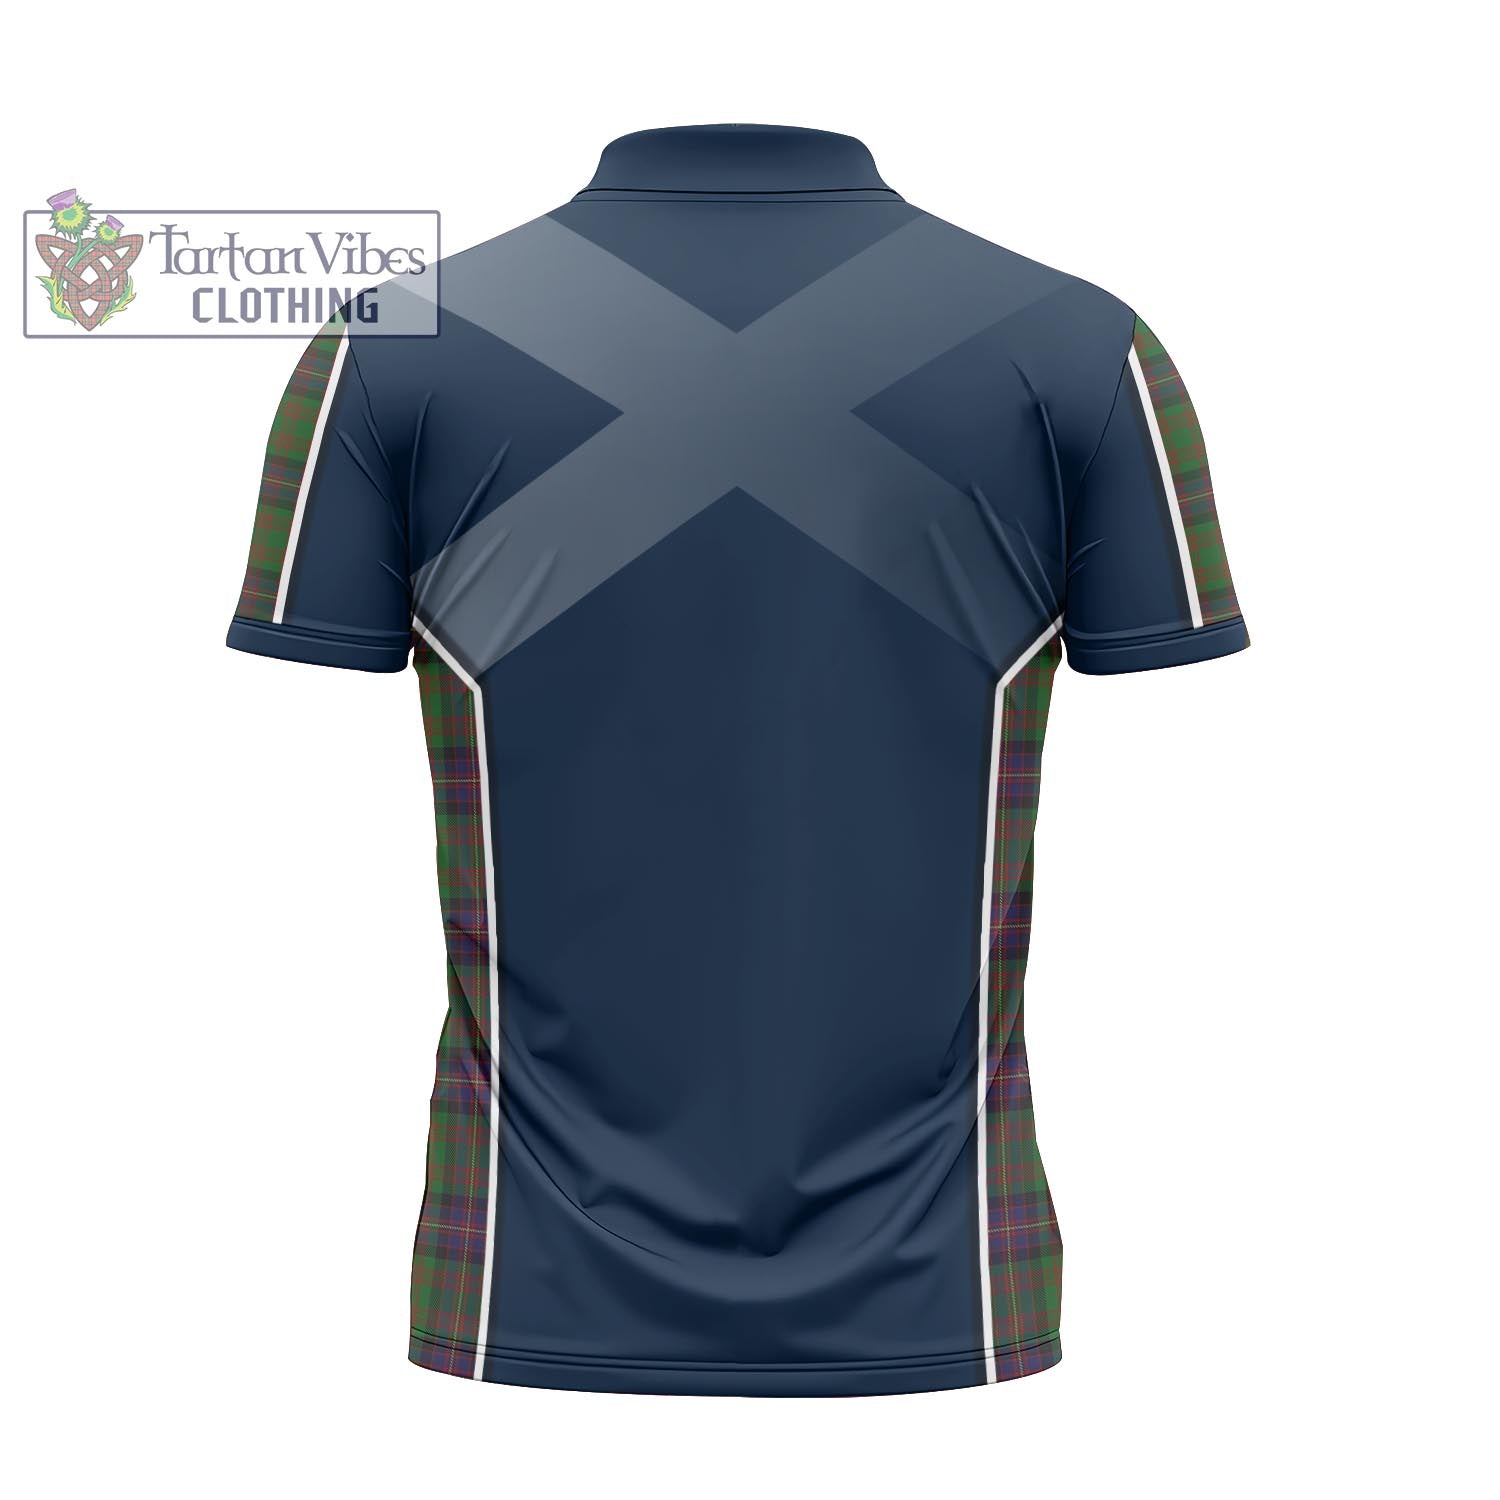 Tartan Vibes Clothing Cochrane Tartan Zipper Polo Shirt with Family Crest and Scottish Thistle Vibes Sport Style